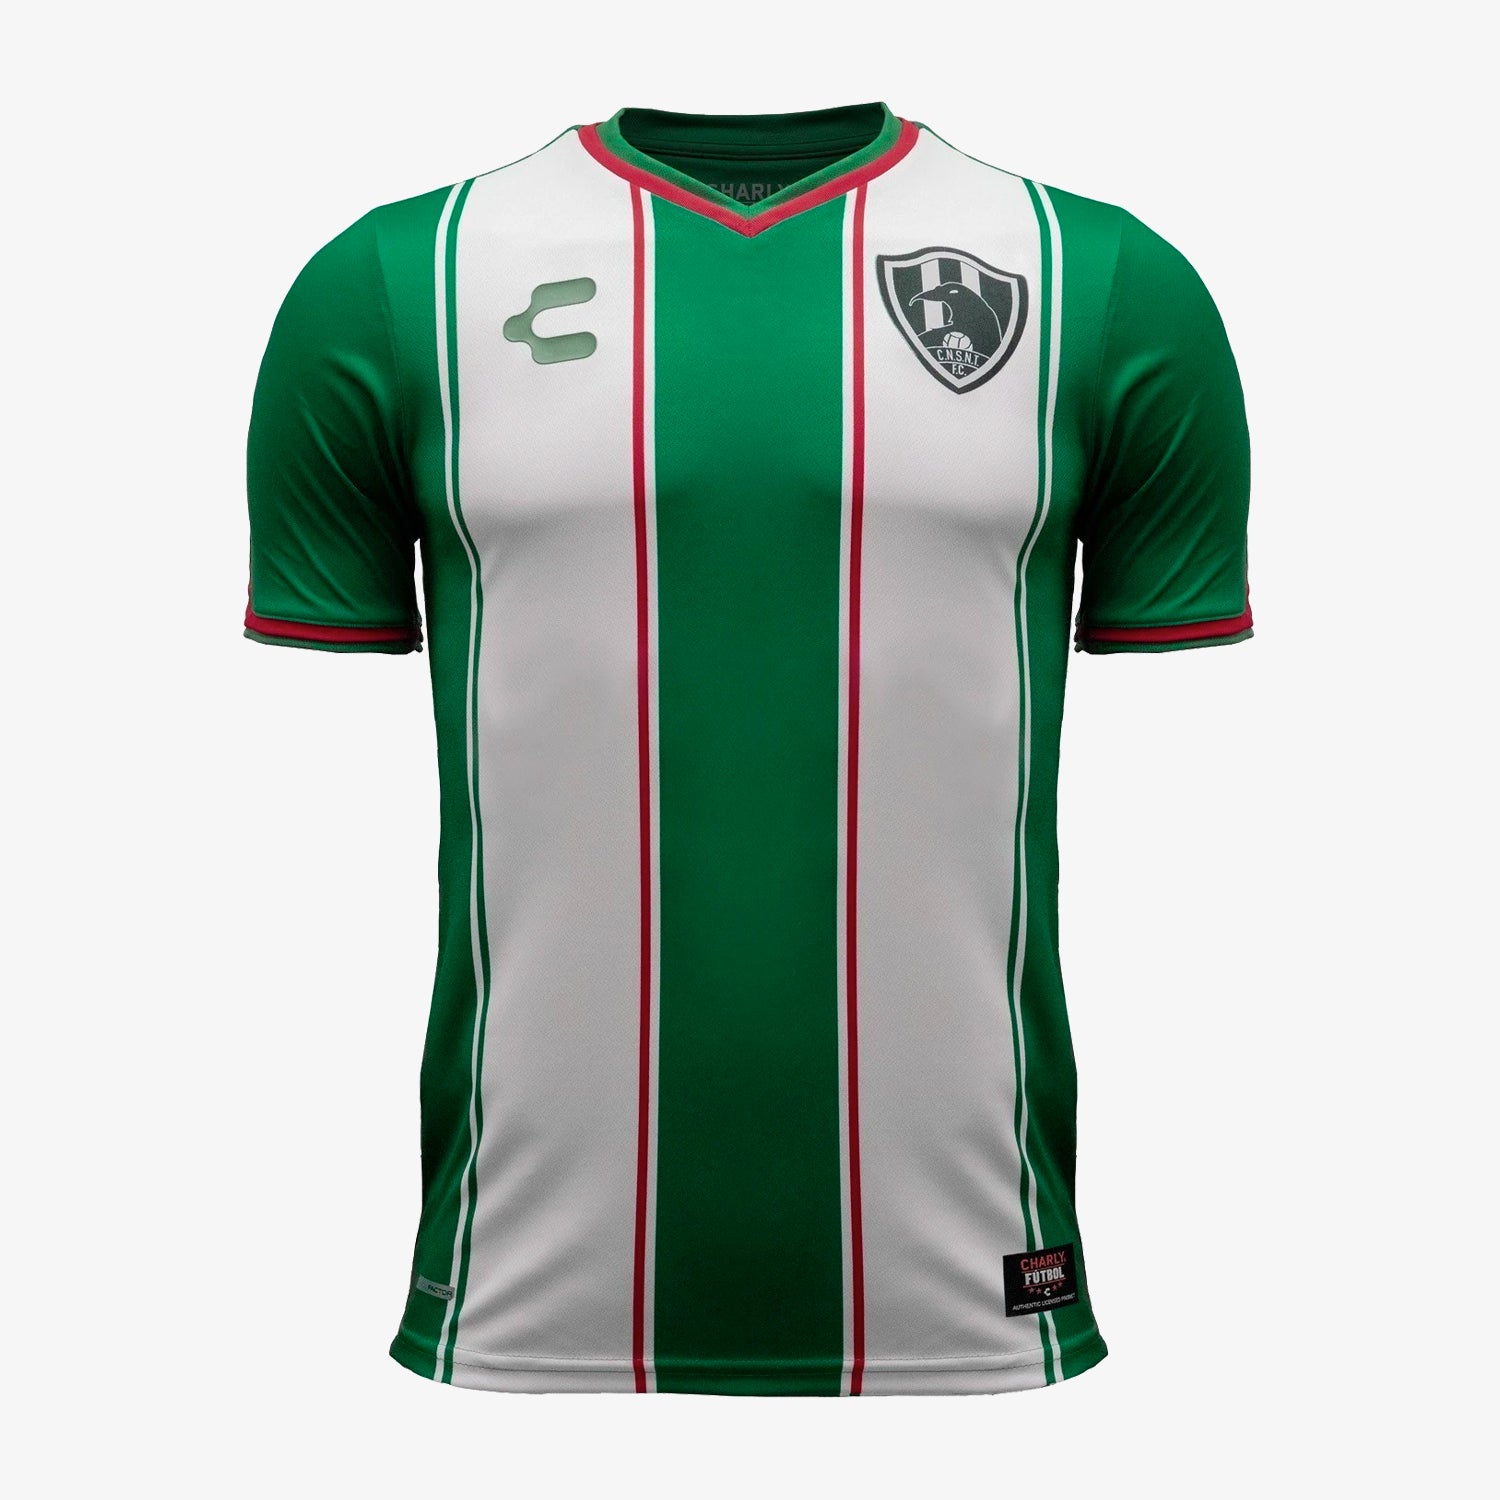 Mens . Cuervos 18/19 Away Soccer Jersey - Green/White/Red